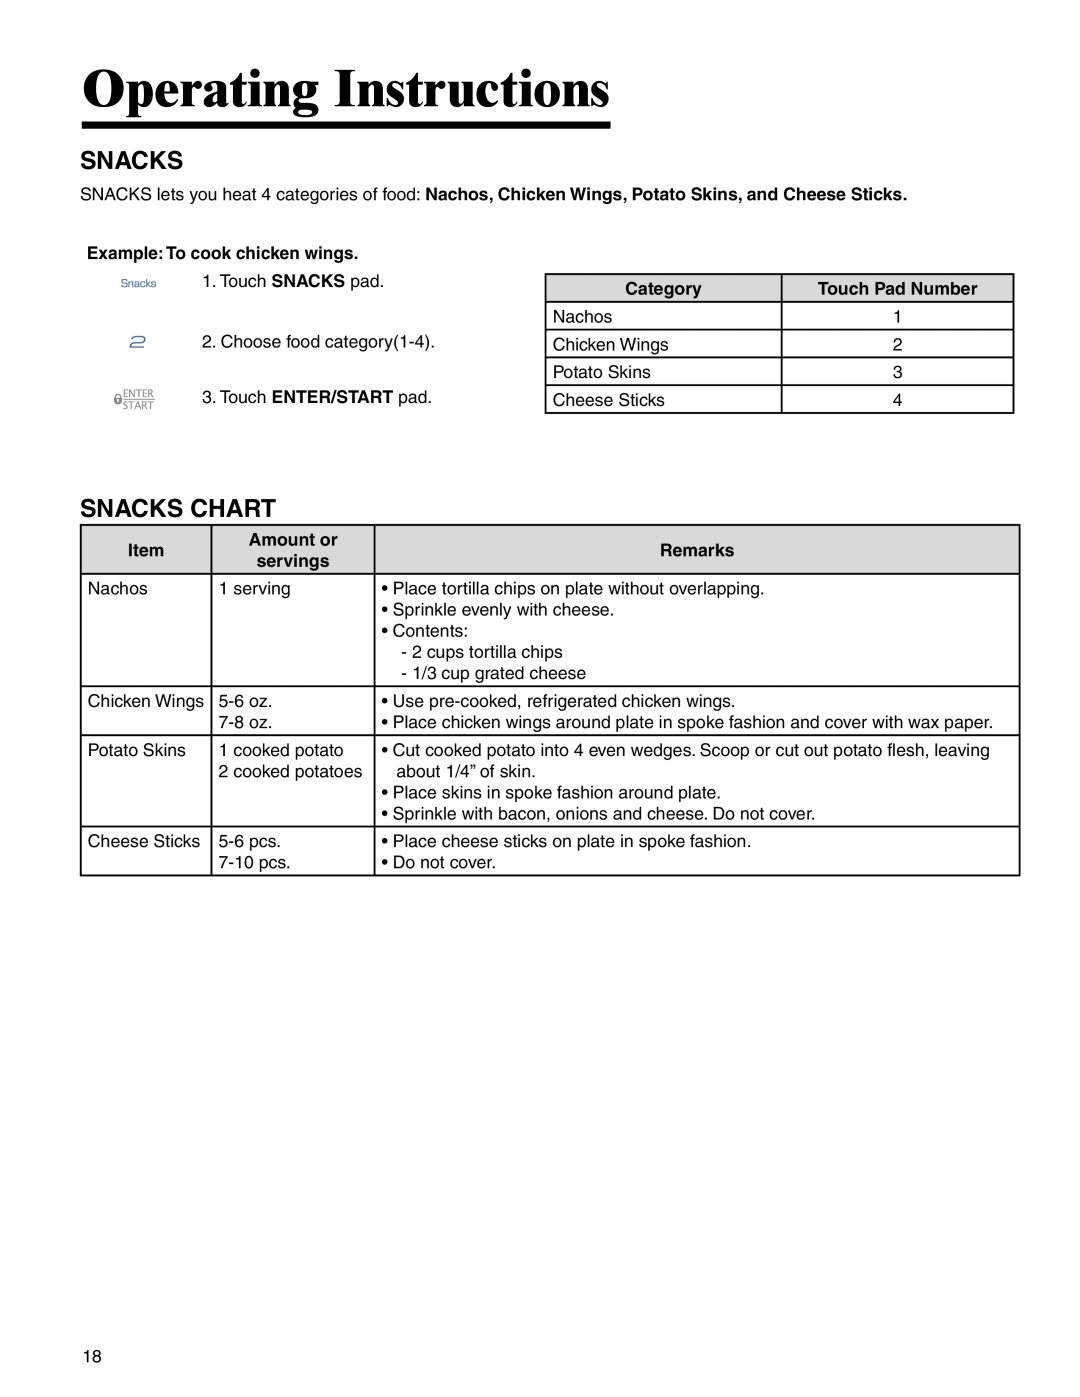 Maytag MMV4205BA Operating Instructions, Snacks Chart, Example: To cook chicken wings, Category, Touch Pad Number 